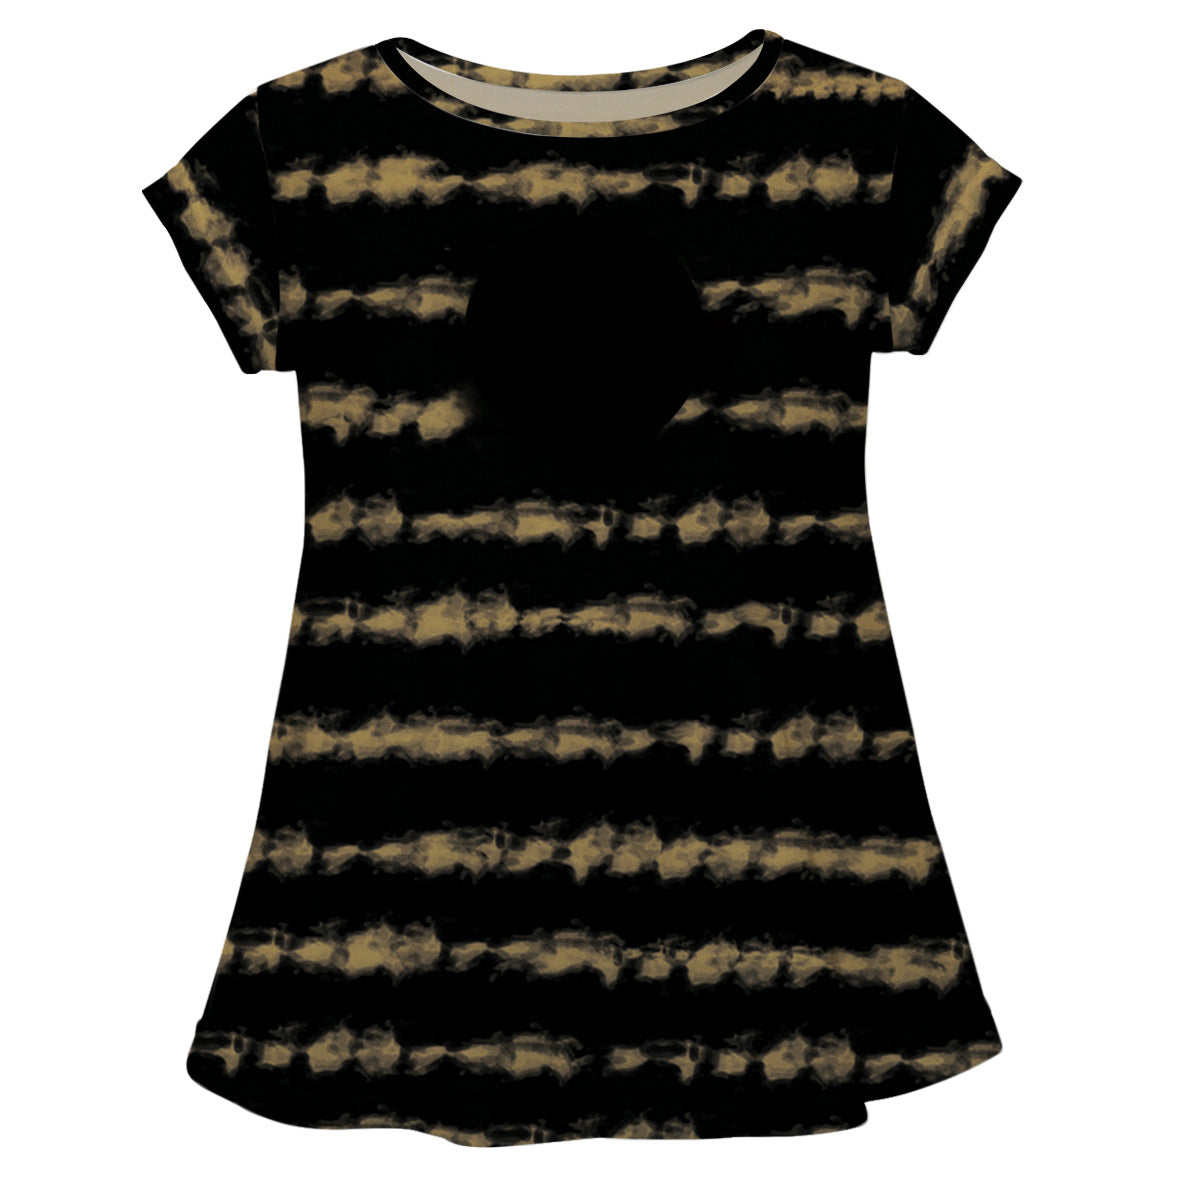 Girls black and gold tie dye blouse with monogram - Wimziy&Co.